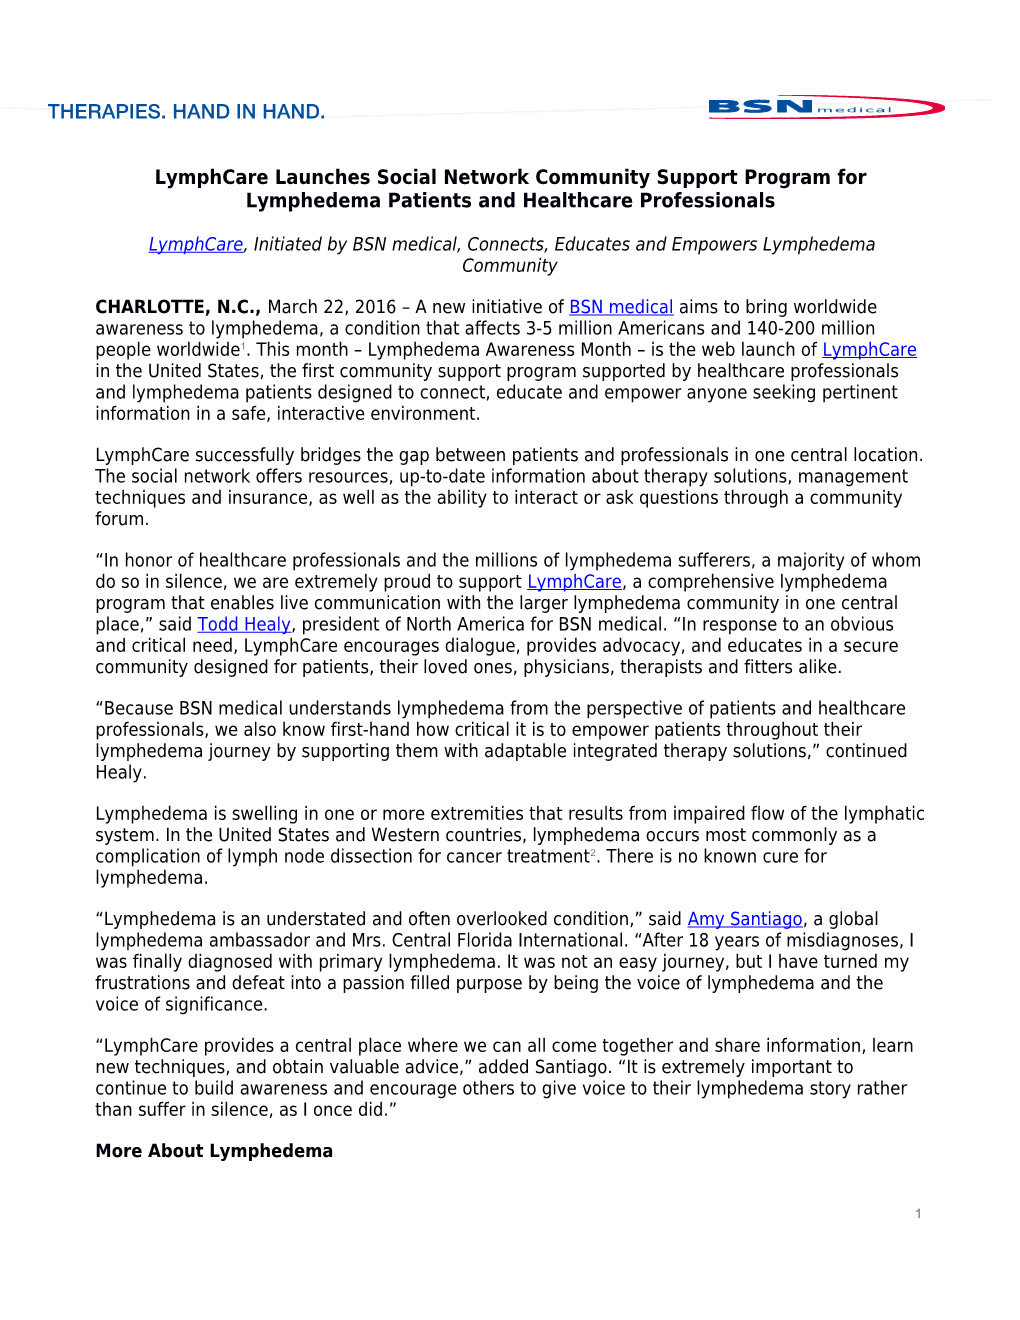 Lymphcare Launches Social Network Community Support Program for Lymphedema Patients And